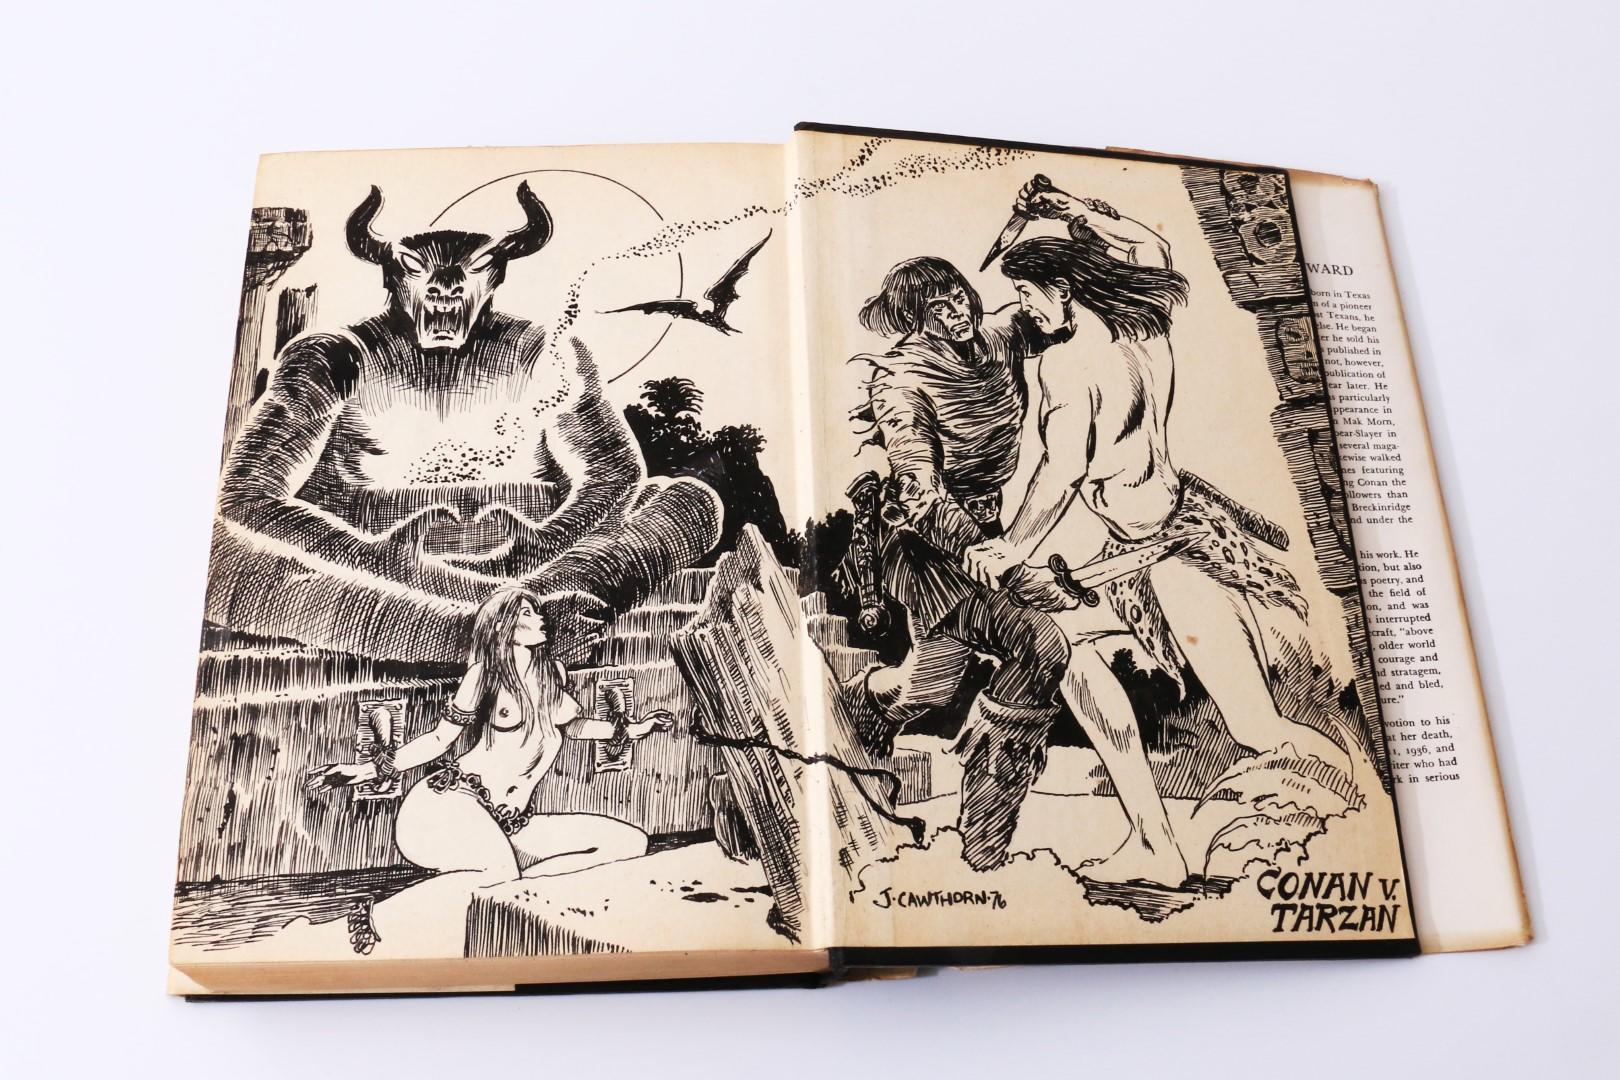 Robert E. Howard - Skull-Face and Others - Arkham House, 1946, First Edition.